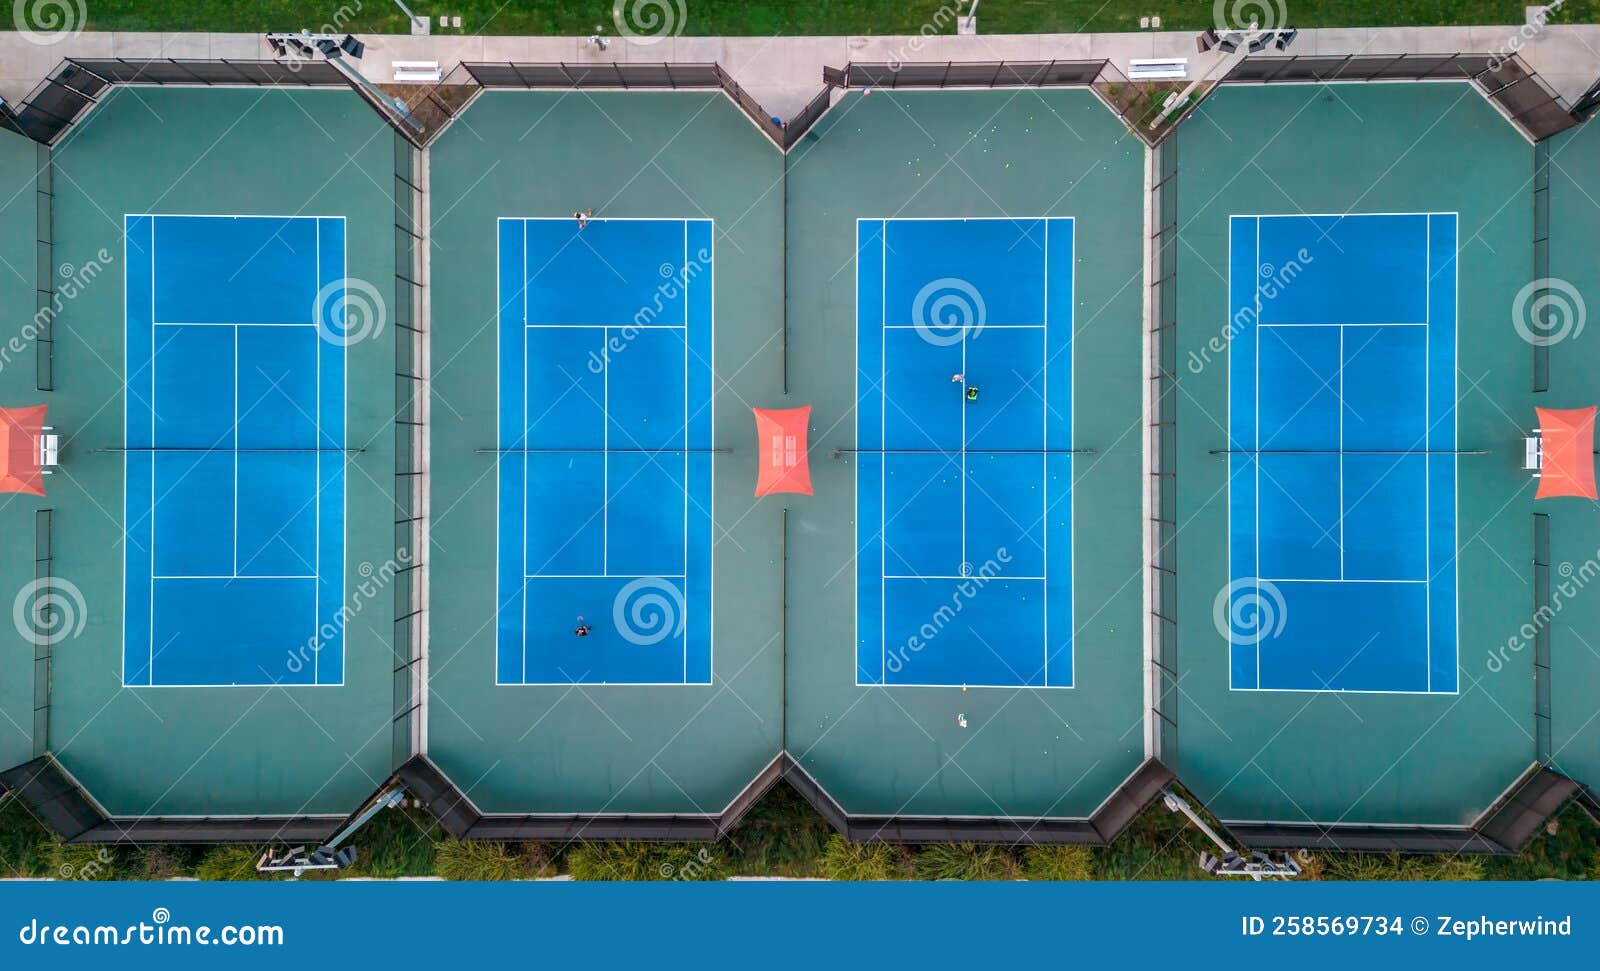 lighted tennis courts grouped together